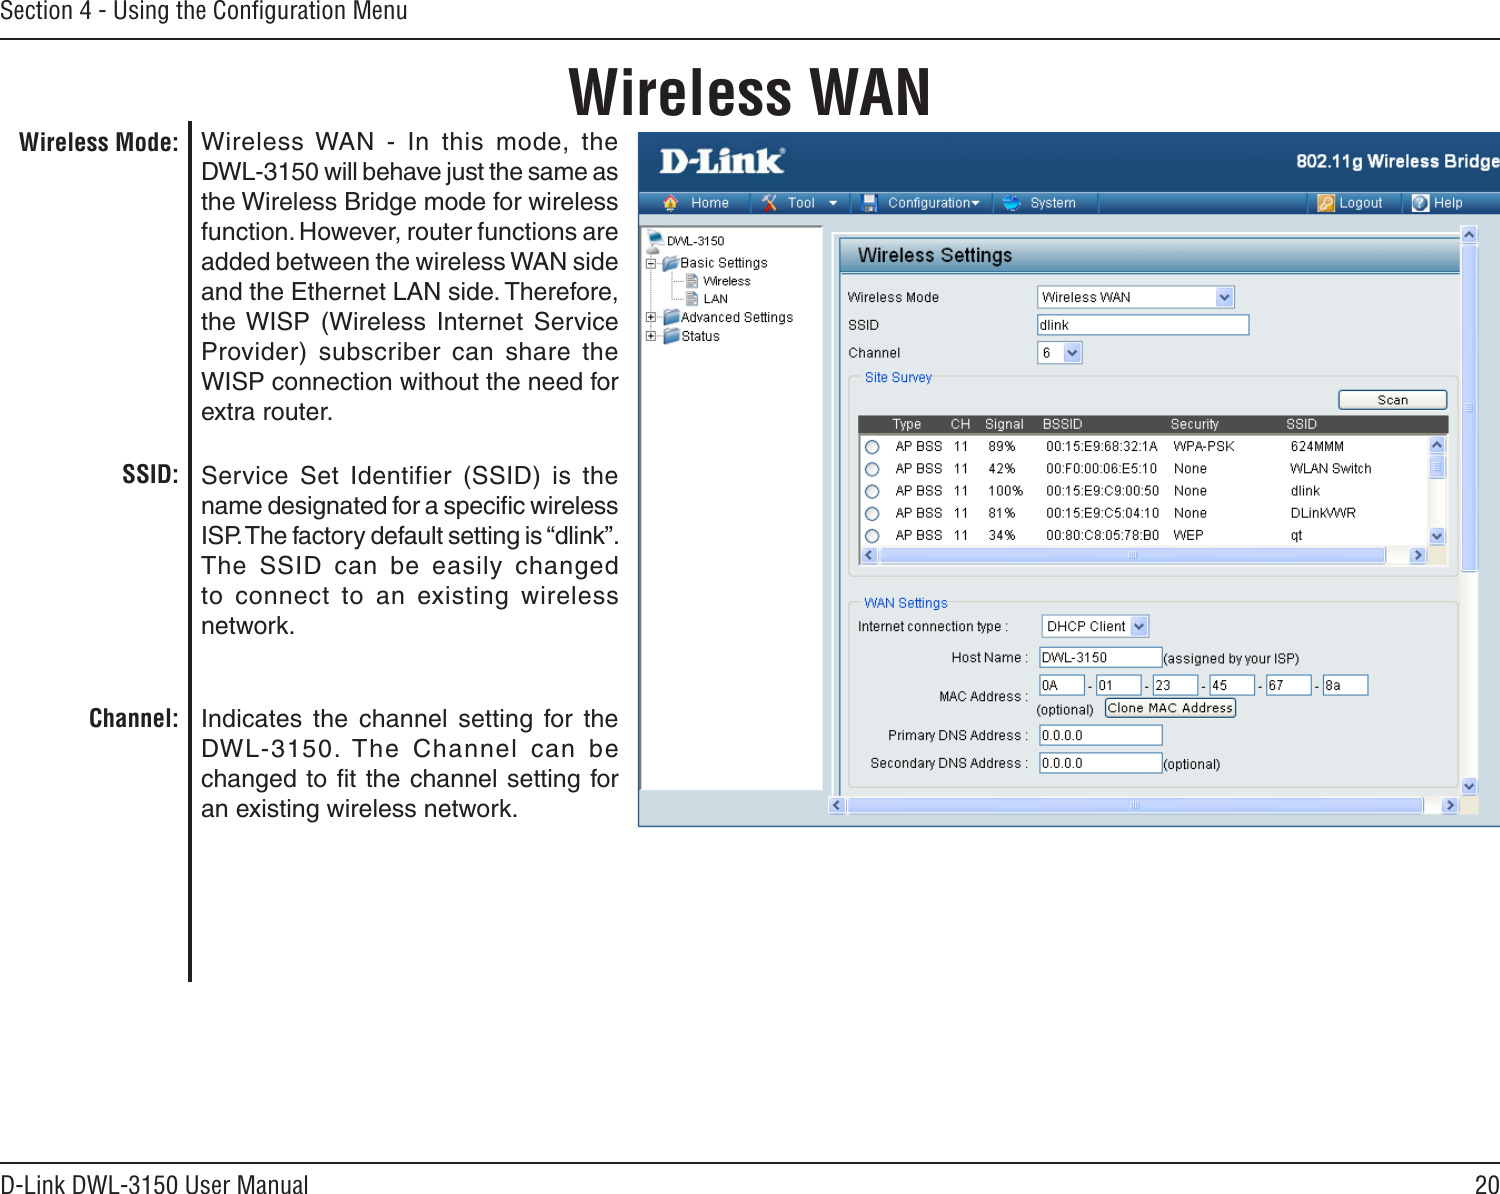 20D-Link DWL-3150 User ManualSection 4 - Using the Conﬁguration MenuWireless WANWireless WAN  -  In  this  mode,  the DWL-3150 will behave just the same as the Wireless Bridge mode for wireless function. However, router functions are added between the wireless WAN side and the Ethernet LAN side. Therefore, the WISP  (Wireless  Internet  Service Provider)  subscriber  can  share  the WISP connection without the need for extra router. Service  Set  Identifier  (SSID)  is  the name designated for a speciﬁc wireless ISP. The factory default setting is “dlink”. The  SSID  can  be  easily  changed to  connect  to  an  existing  wireless network.Indicates  the  channel  setting  for  the DWL-3150. The  Channel  can  be changed to ﬁt the channel setting for an existing wireless network.Wireless Mode:SSID:Channel: